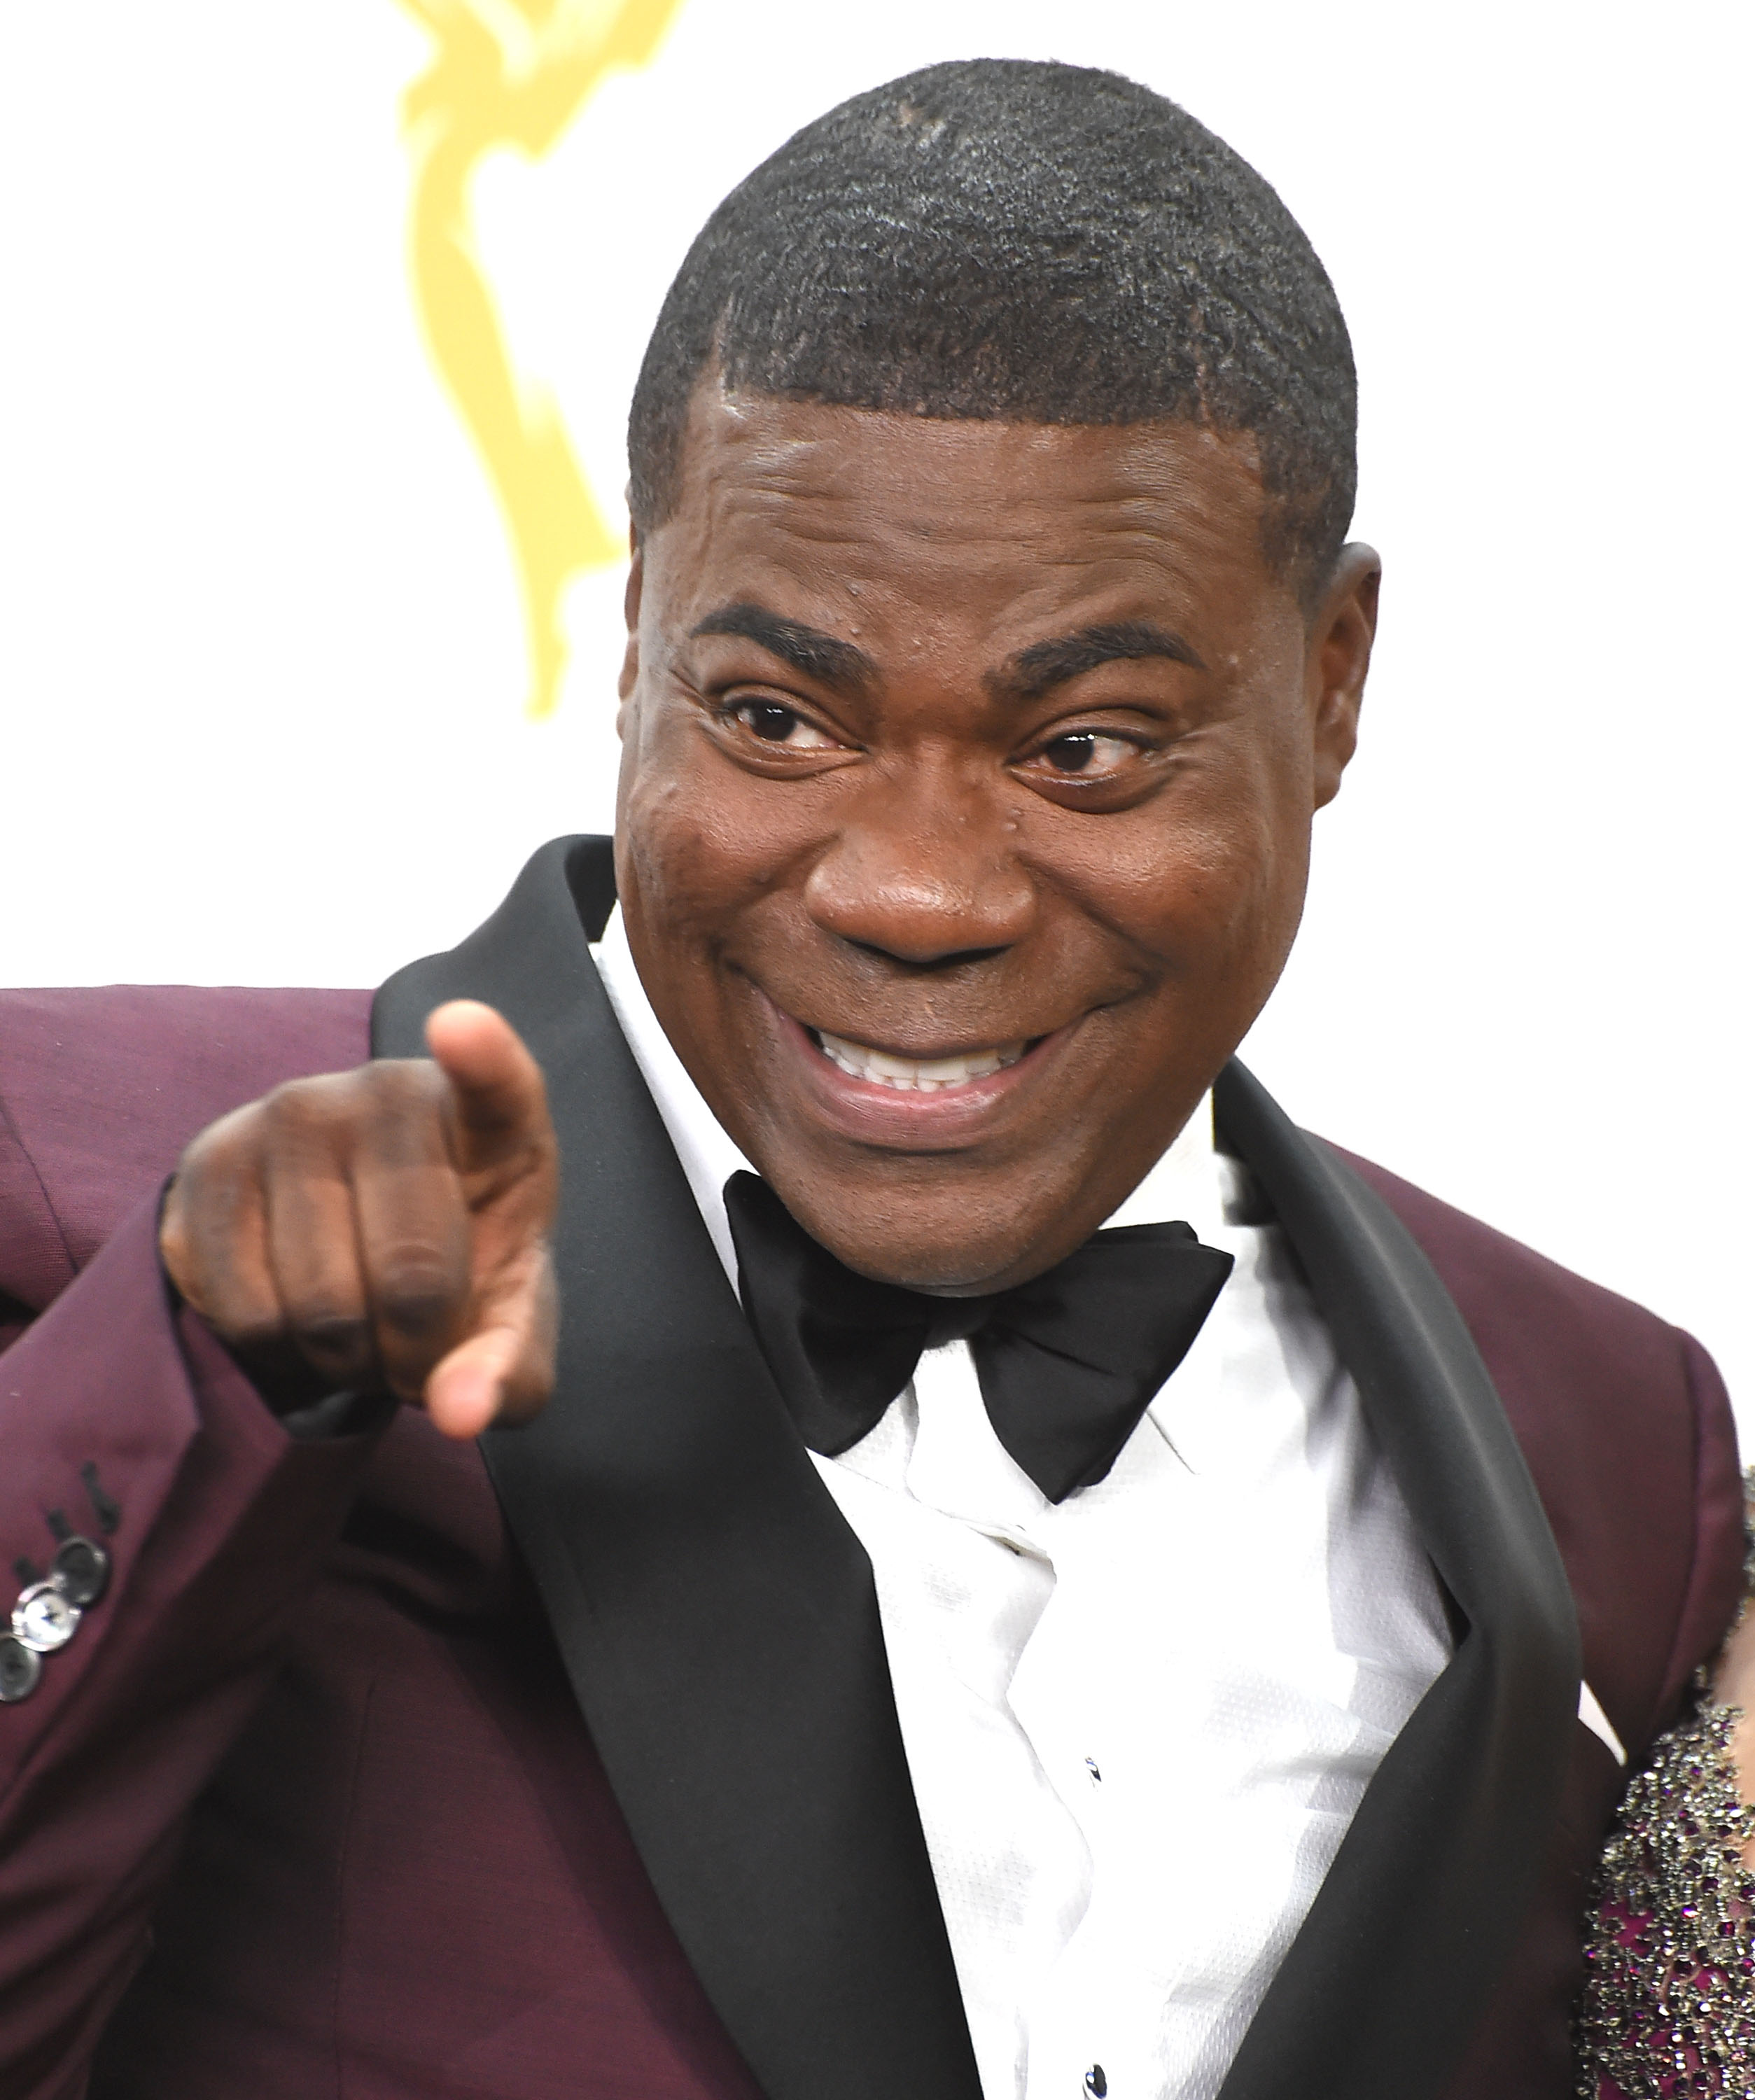 Tracy Morgan on Sept. 20, 2015 in Los Angeles. (Steve Granitz—WireImage/Getty Images)